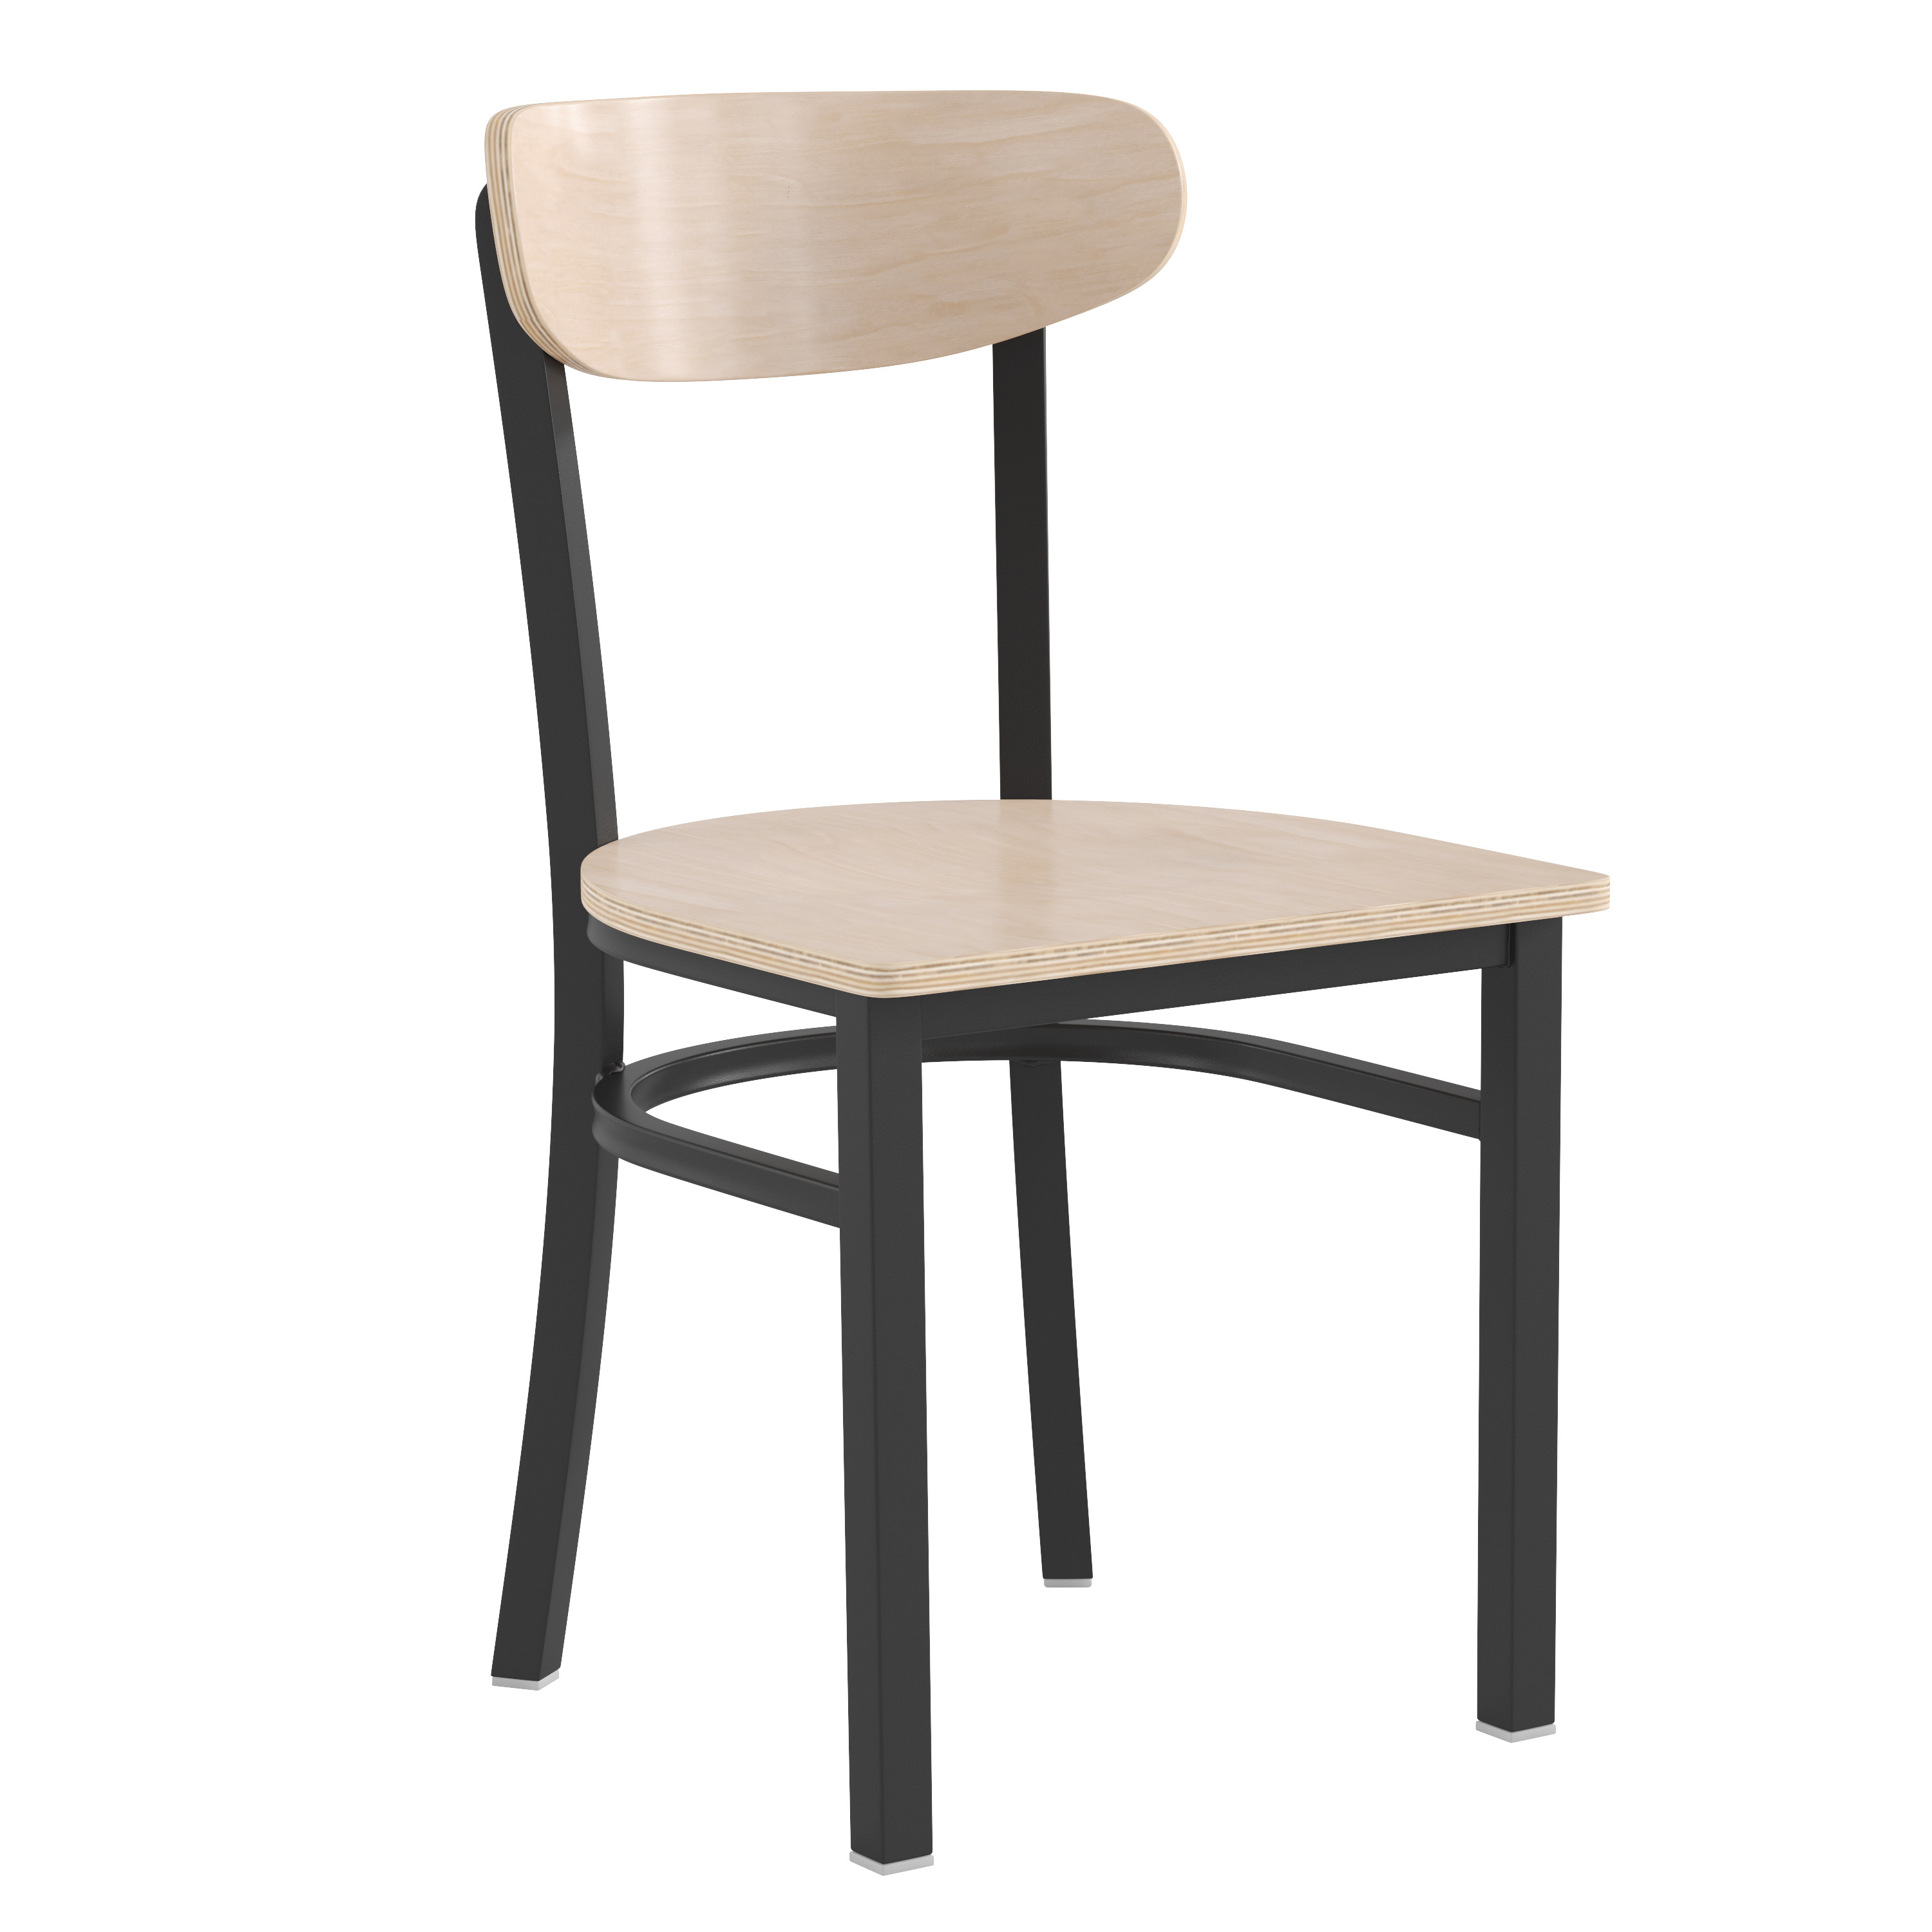 Flash Furniture XU-DG6V5B-NAT-GG Commercial Dining Chair with Natural Wood Boomerang Back, Wood Seat, Black Steel Frame